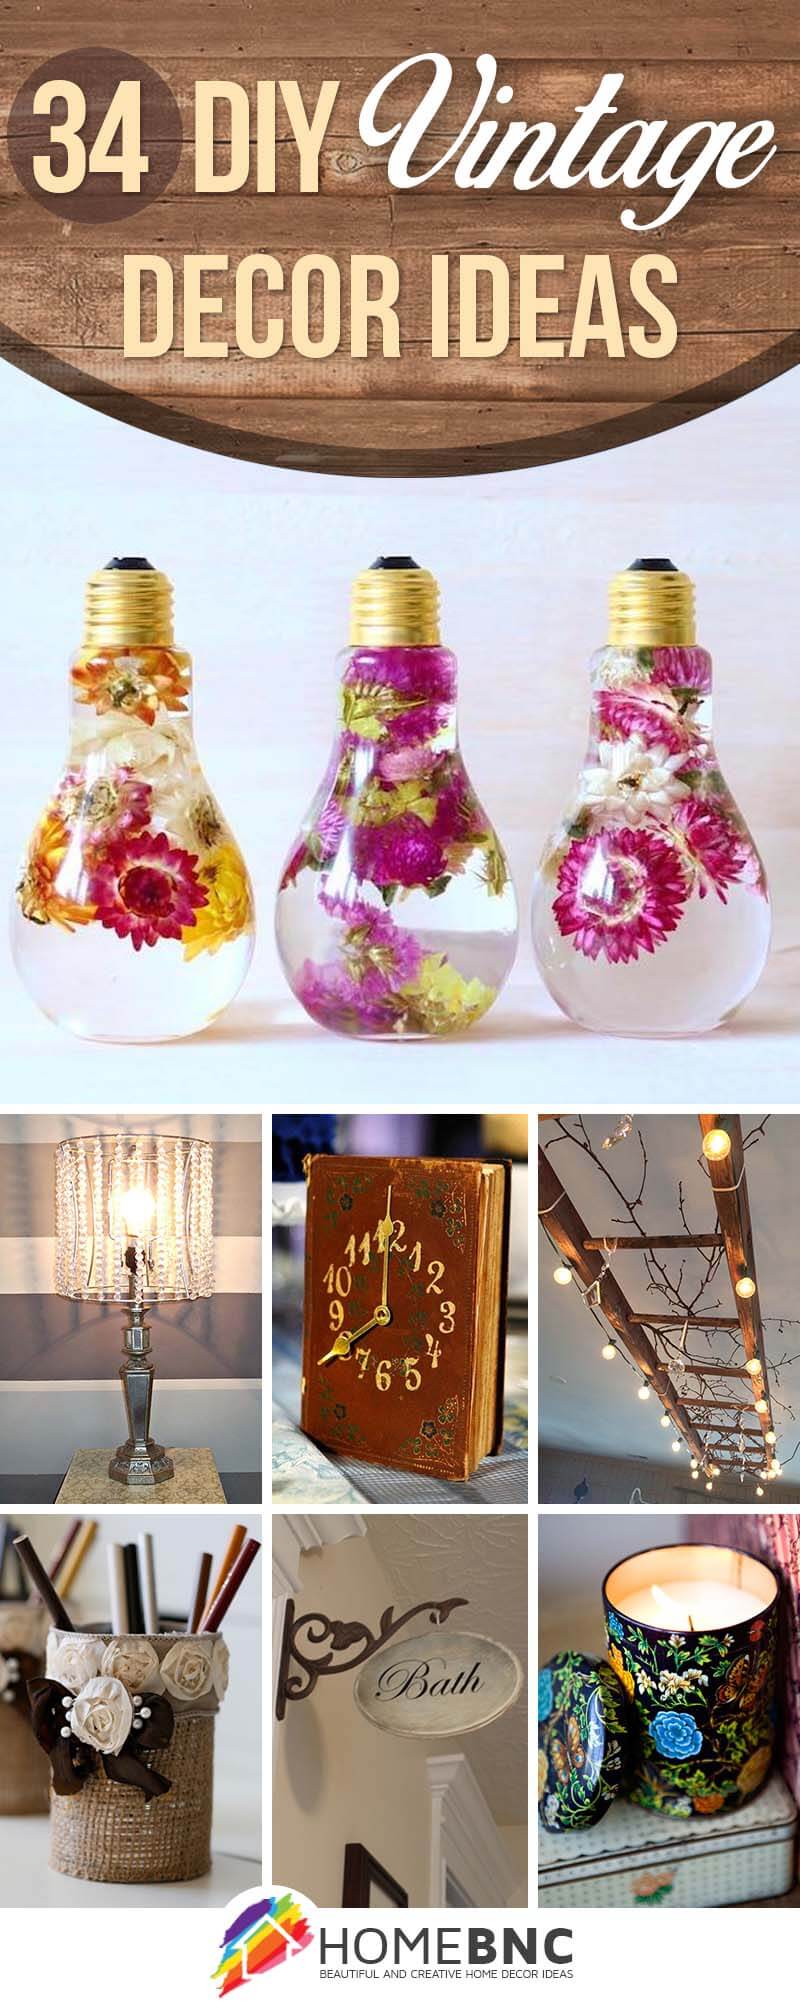 vintage diy decor decorations projects timeless charm inspired designs add homebnc